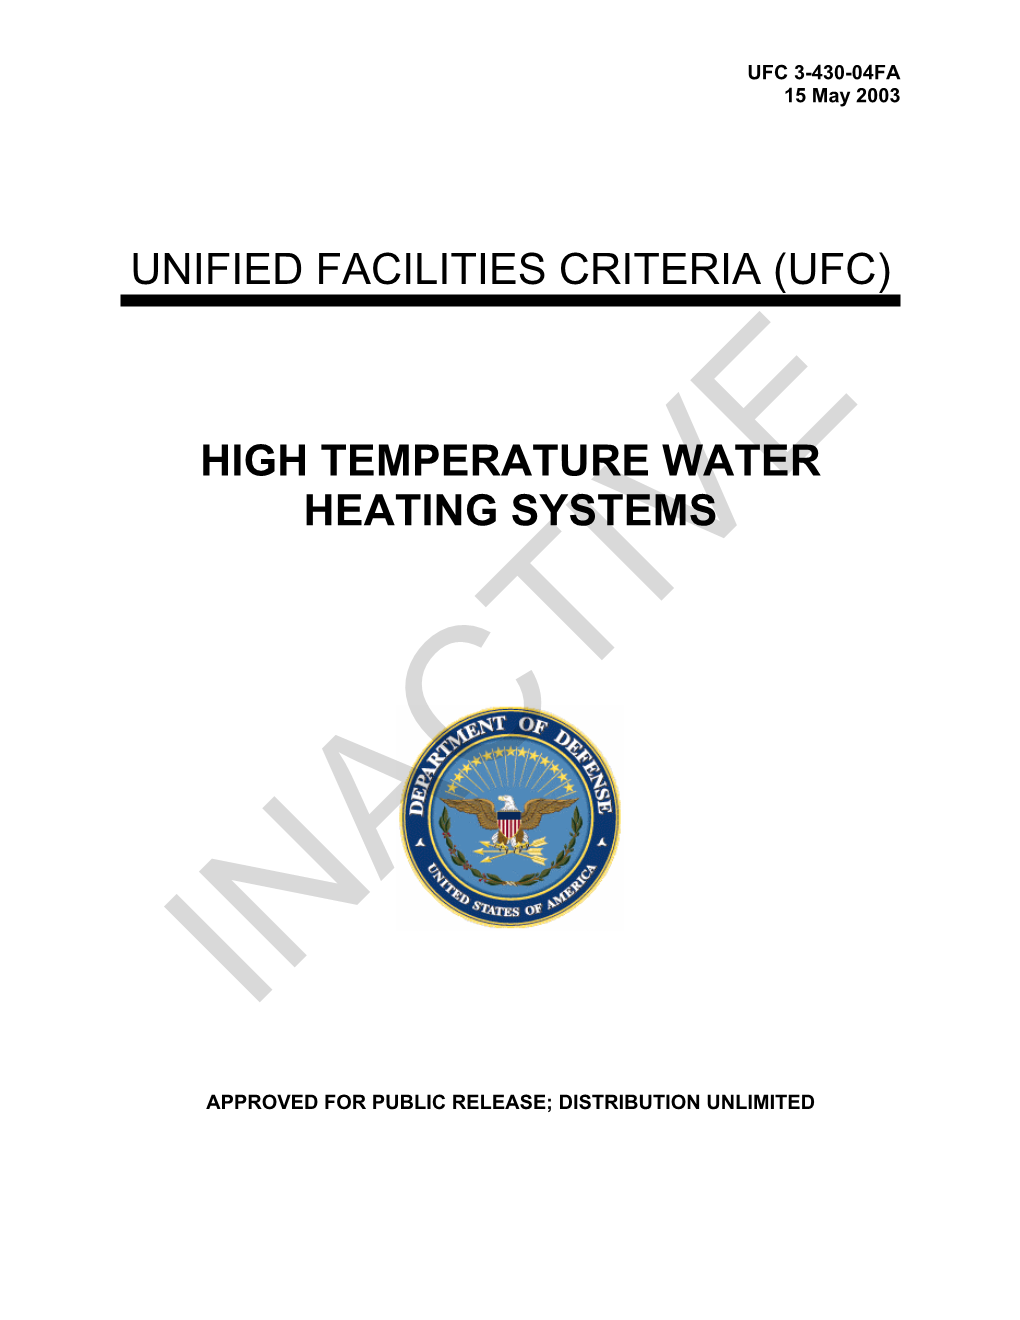 UFC 3-430-04FA High Temperature Water Heating Systems